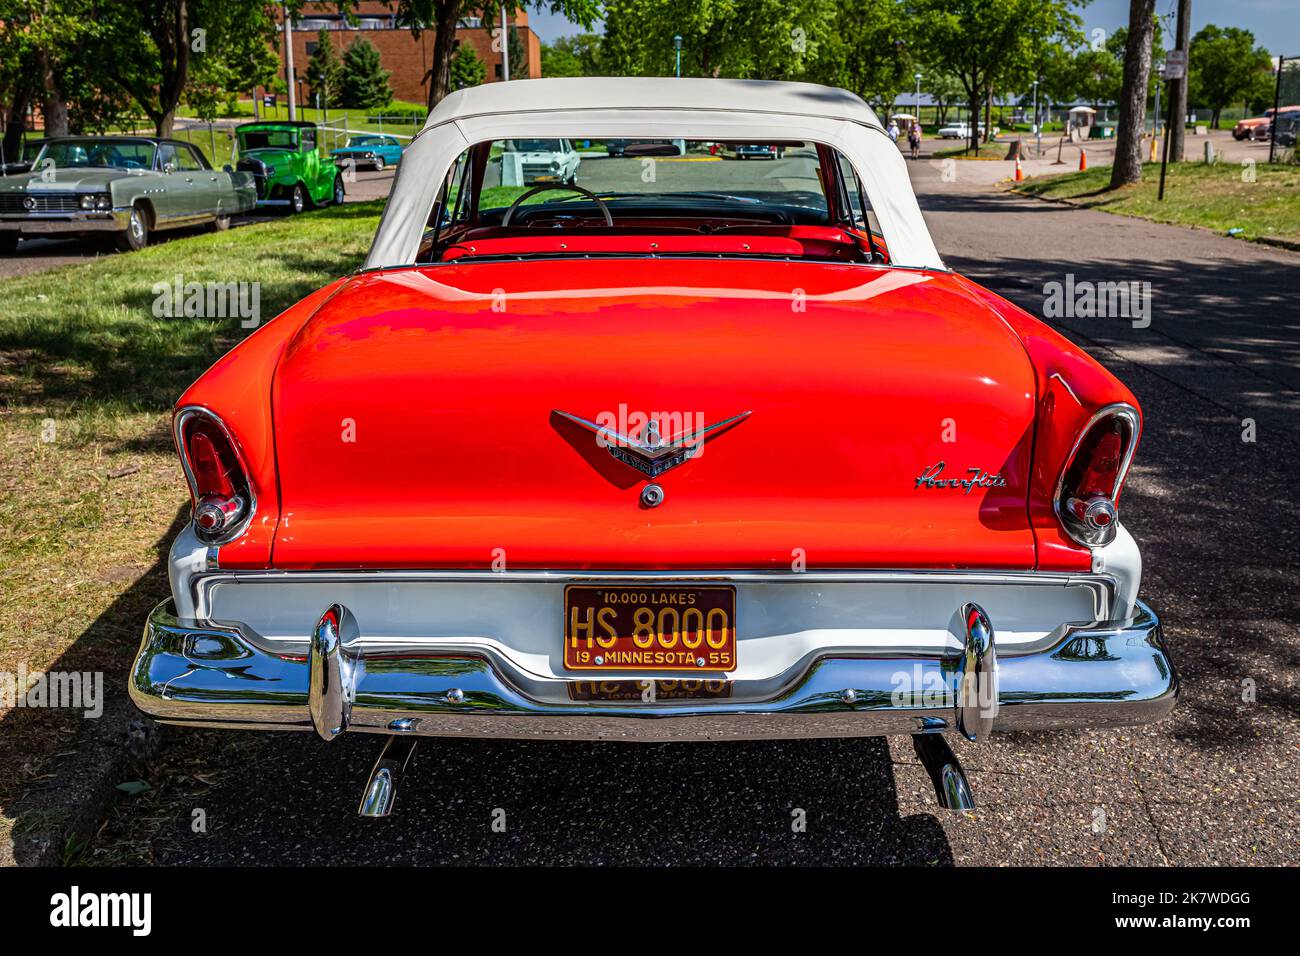 Falcon Heights, MN - June 19, 2022: High perspective rear view of a 1955 Plymouth Belvedere Convertible at a local car show. Stock Photo